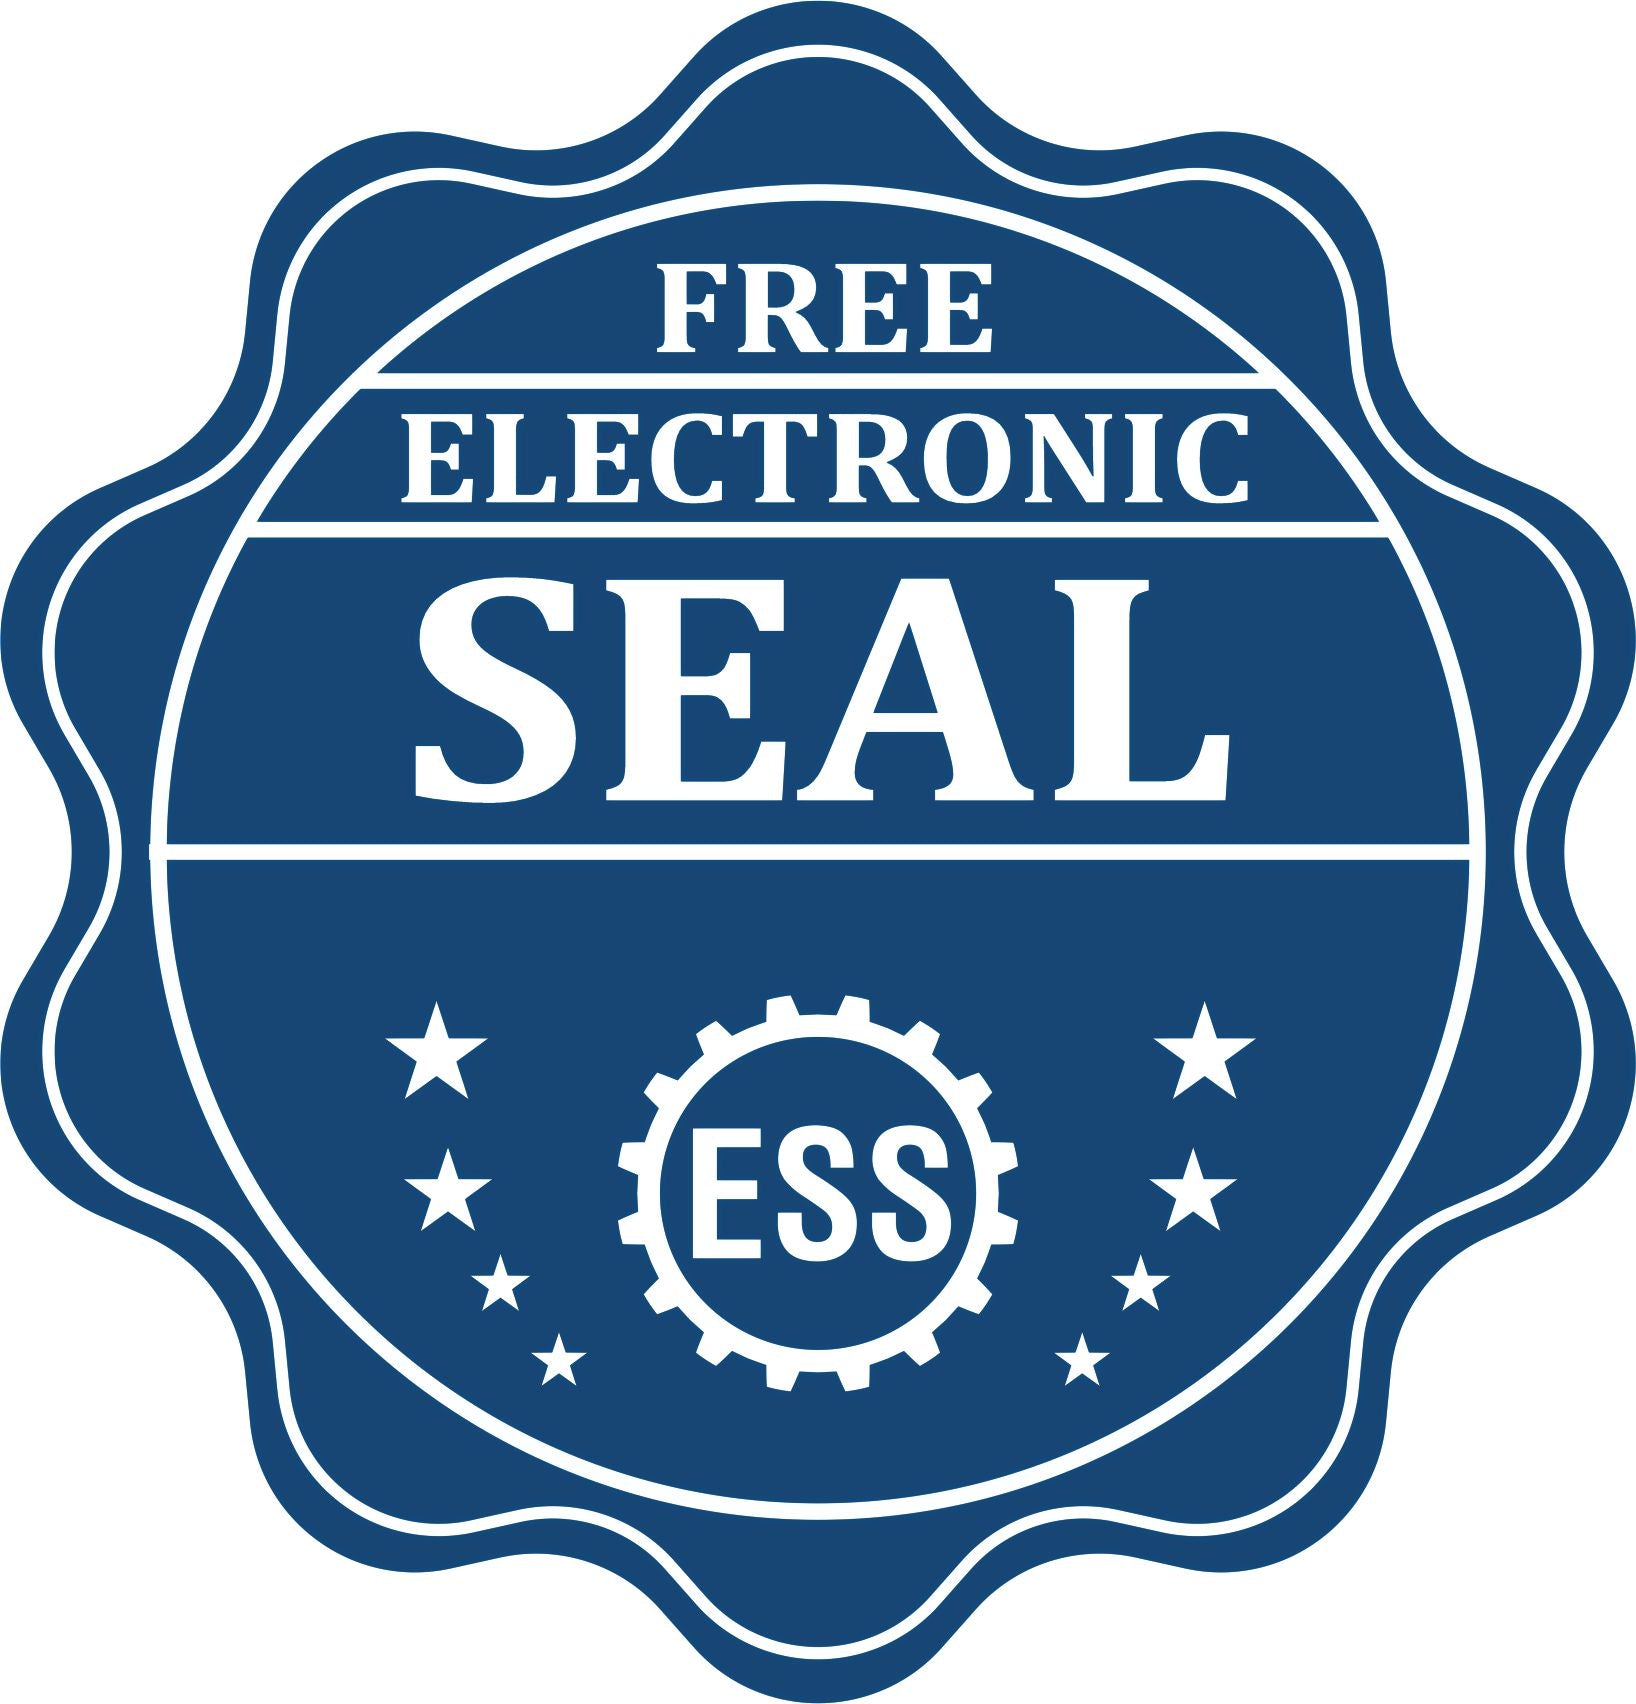 A badge showing a free electronic seal for the State of Utah Soft Land Surveyor Embossing Seal with stars and the ESS gear on the emblem.